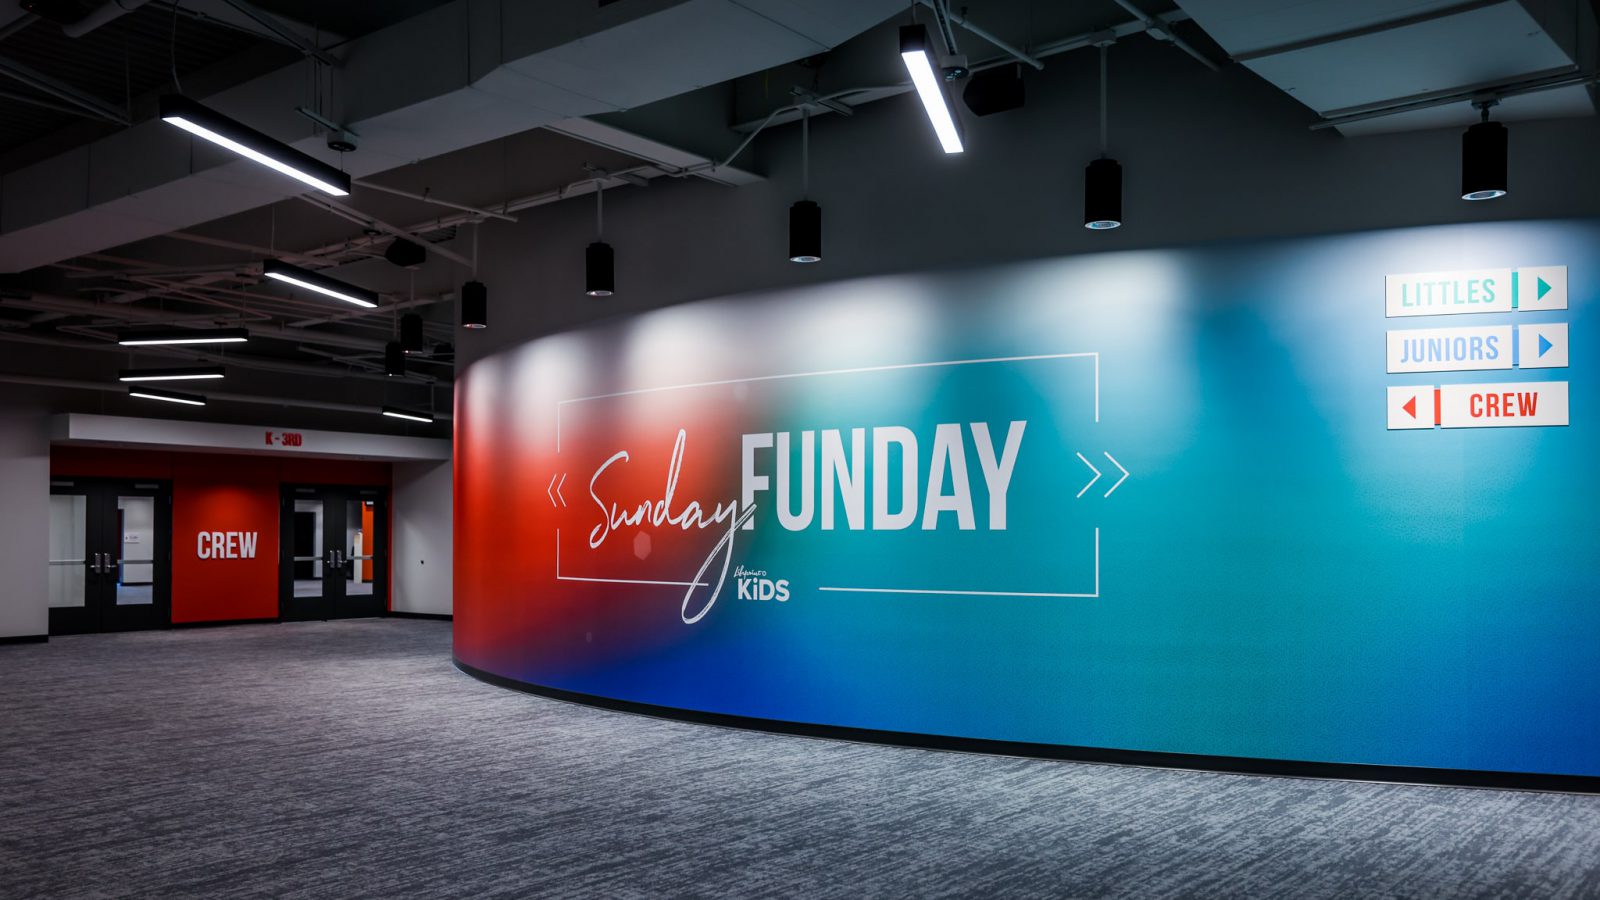 Red and blue wall in hallway that says "Sunday Funday Lifepoint Kids"